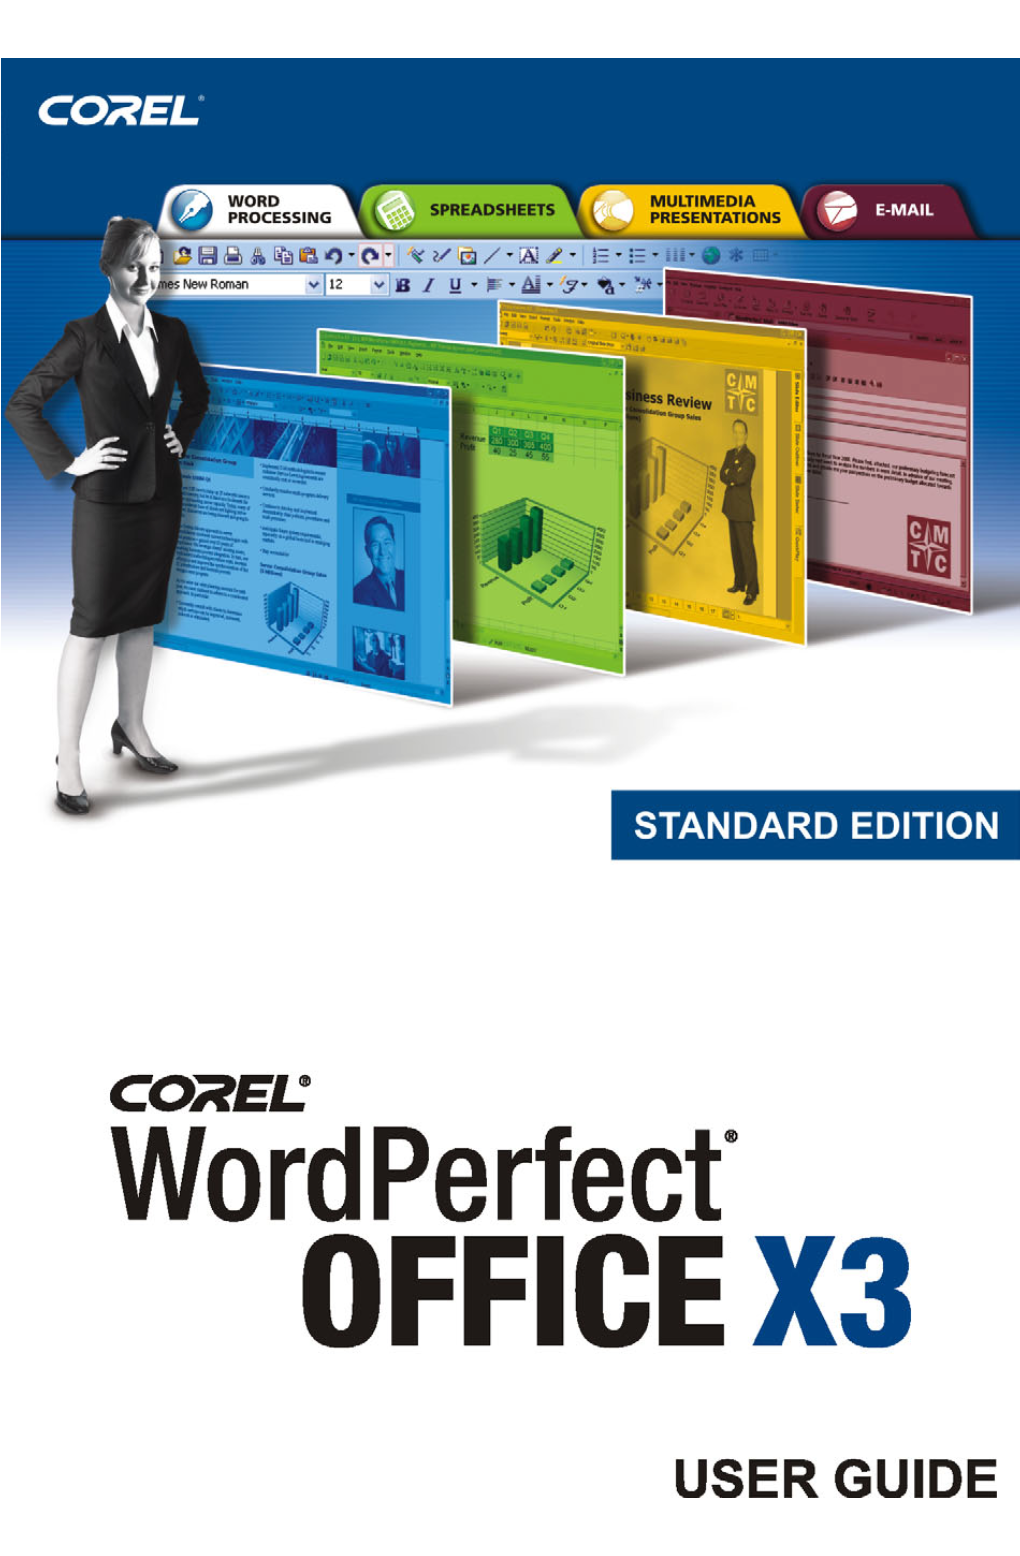 Wordperfect Office X3 User Guide Presentations Graphics Presentations Graphics Lets You Create Drawings, Edit and Create Bitmaps, and Convert Vector Images to Bitmaps